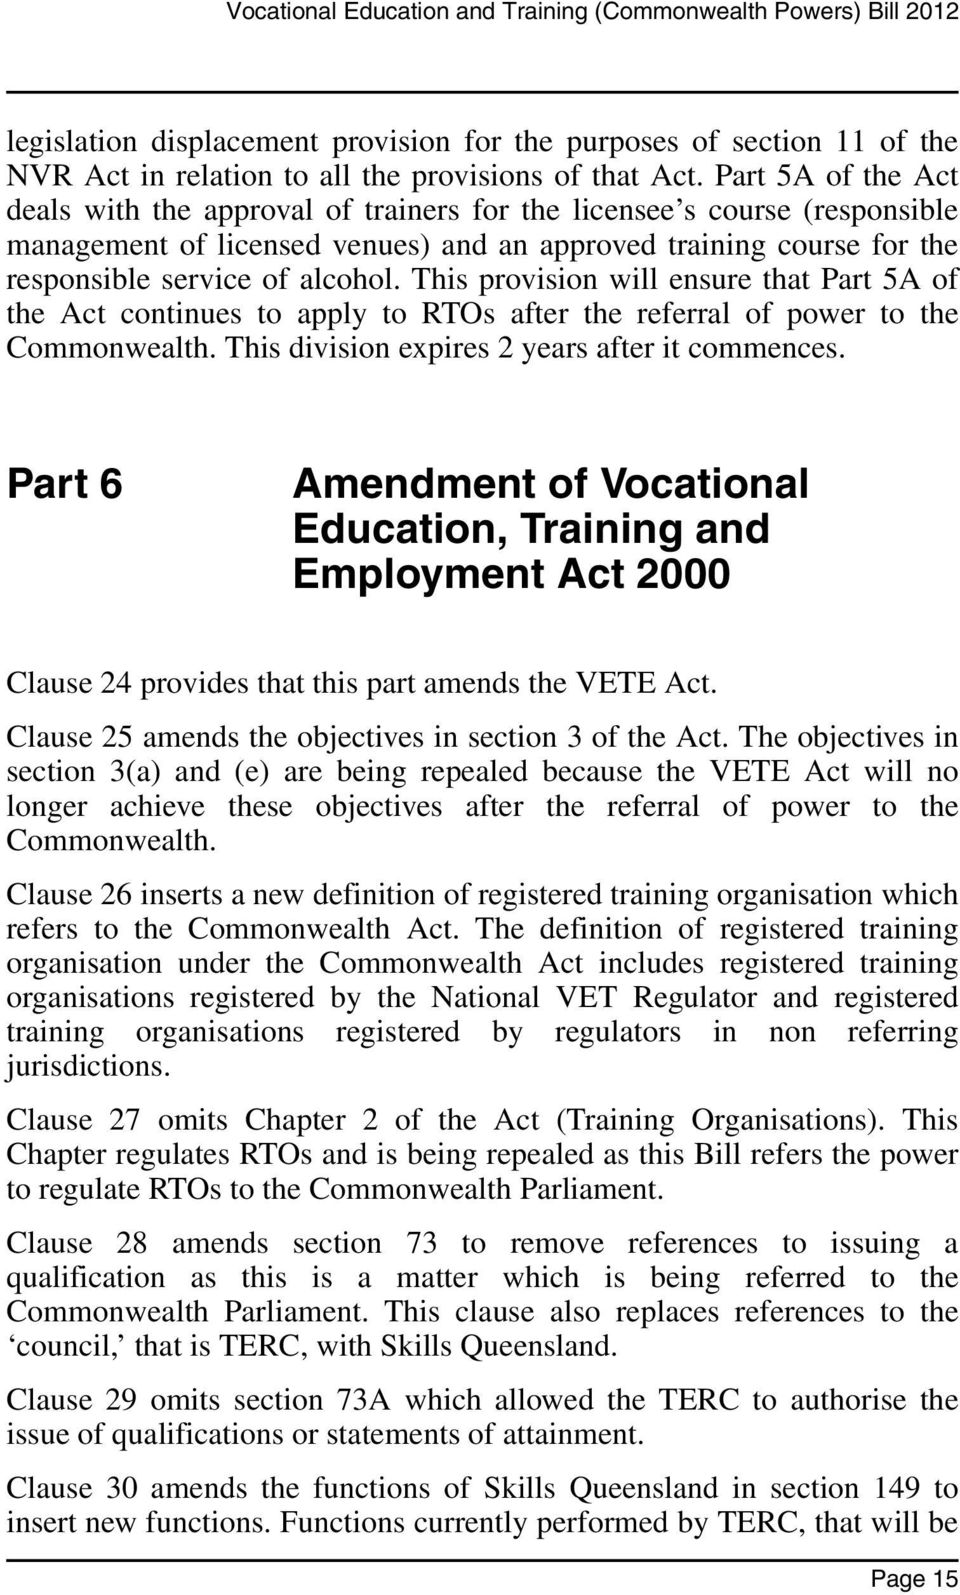 This provision will ensure that Part 5A of the Act continues to apply to RTOs after the referral of power to the Commonwealth. This division expires 2 years after it commences.